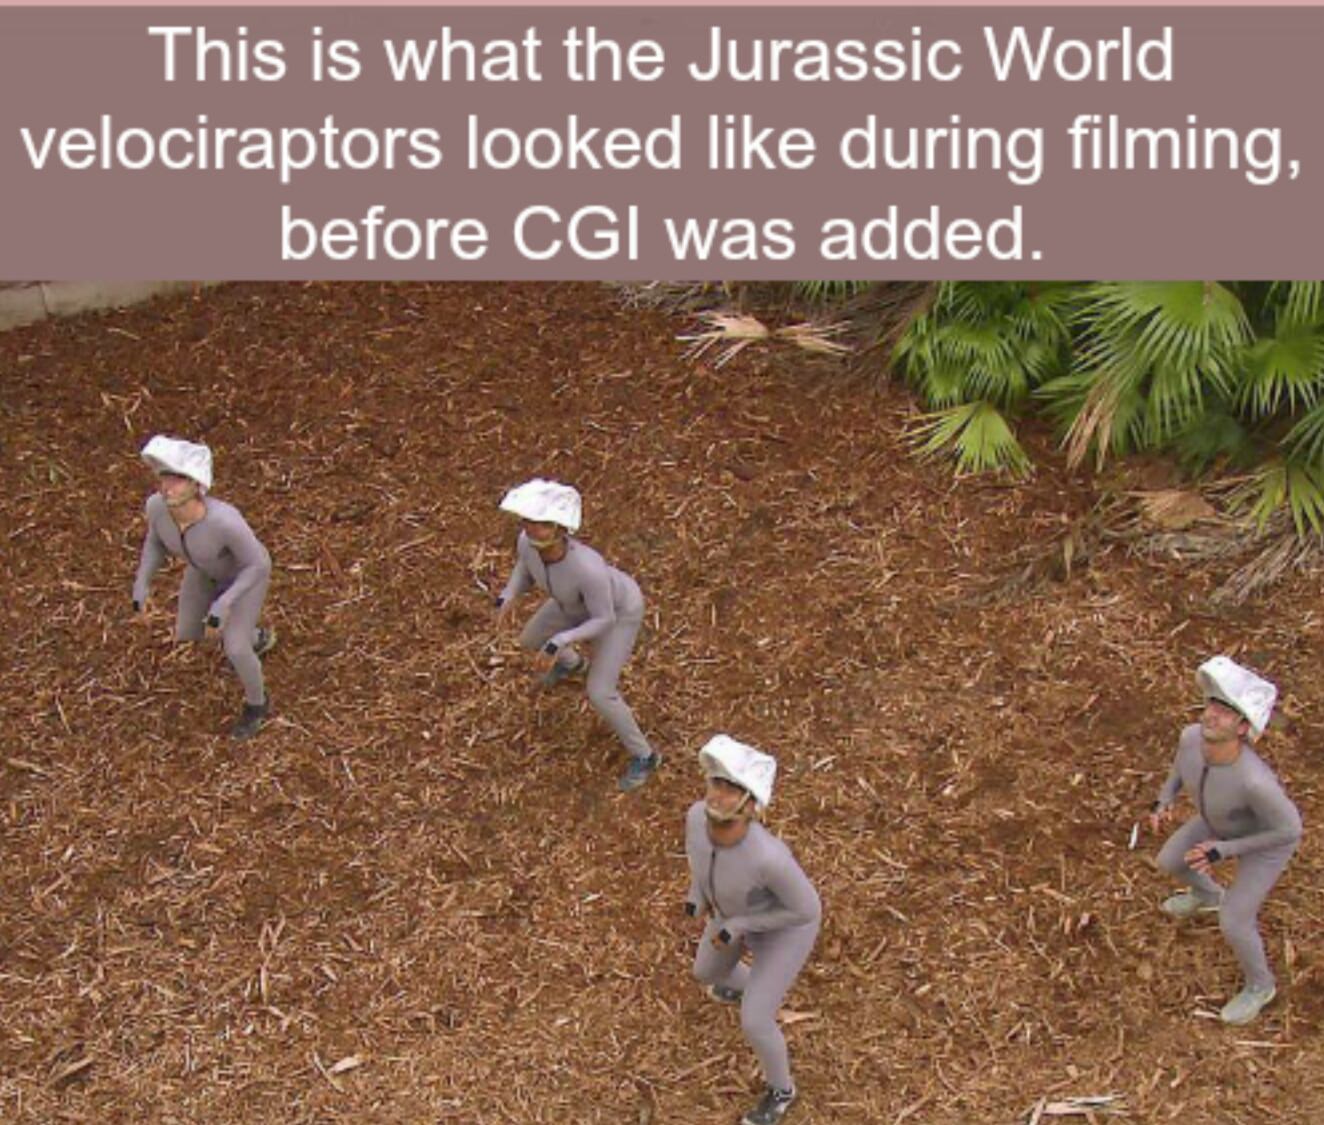 jurassic park before cgi - This is what the Jurassic World velociraptors looked during filming, before Cgi was added.